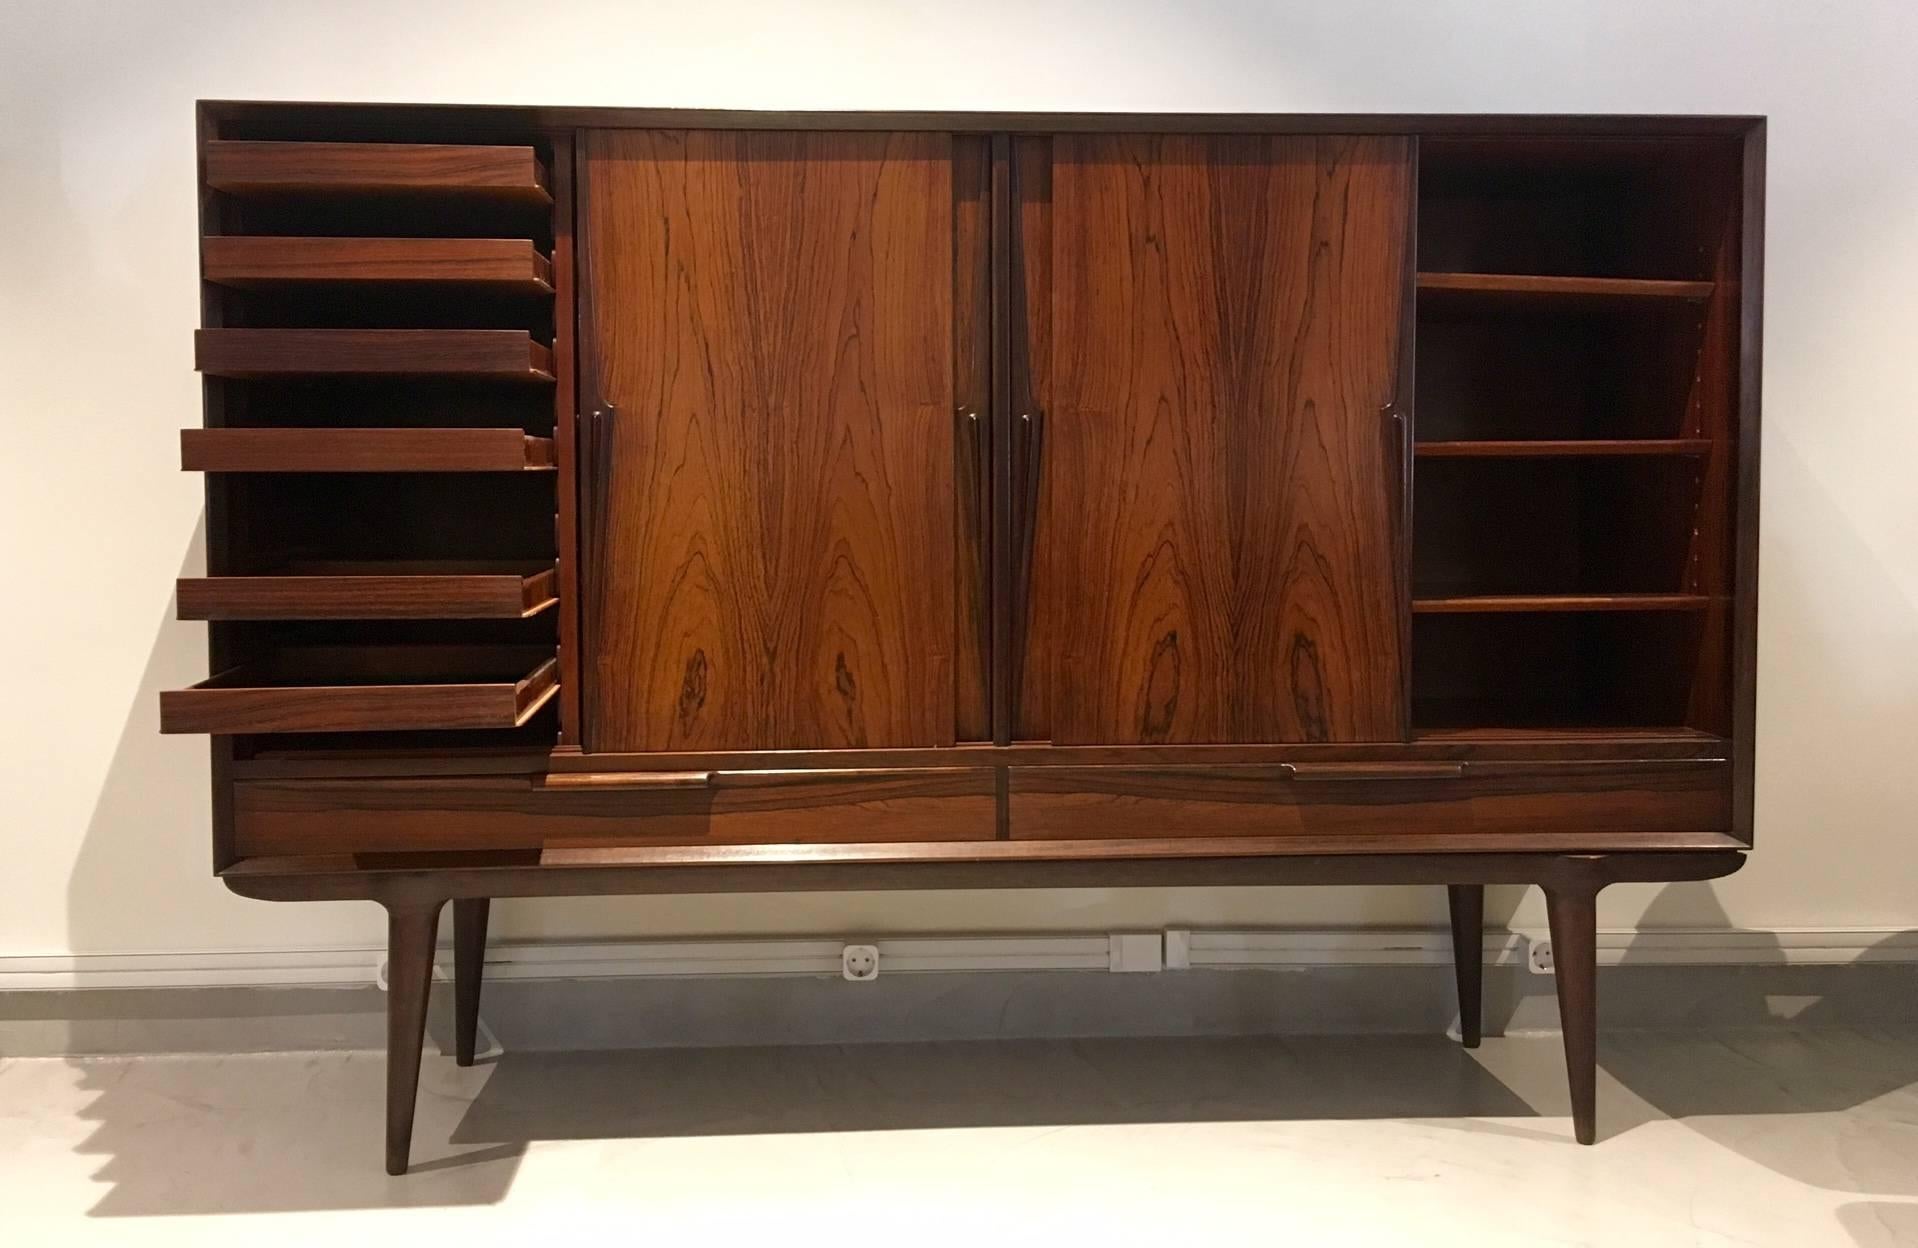 Beautiful hardwood cabinet, model 13, manufactured by Omann Jun Møbelfabrik. Four sliding doors and two drawers. Behind the right door are six felt-lined pull-out trays.